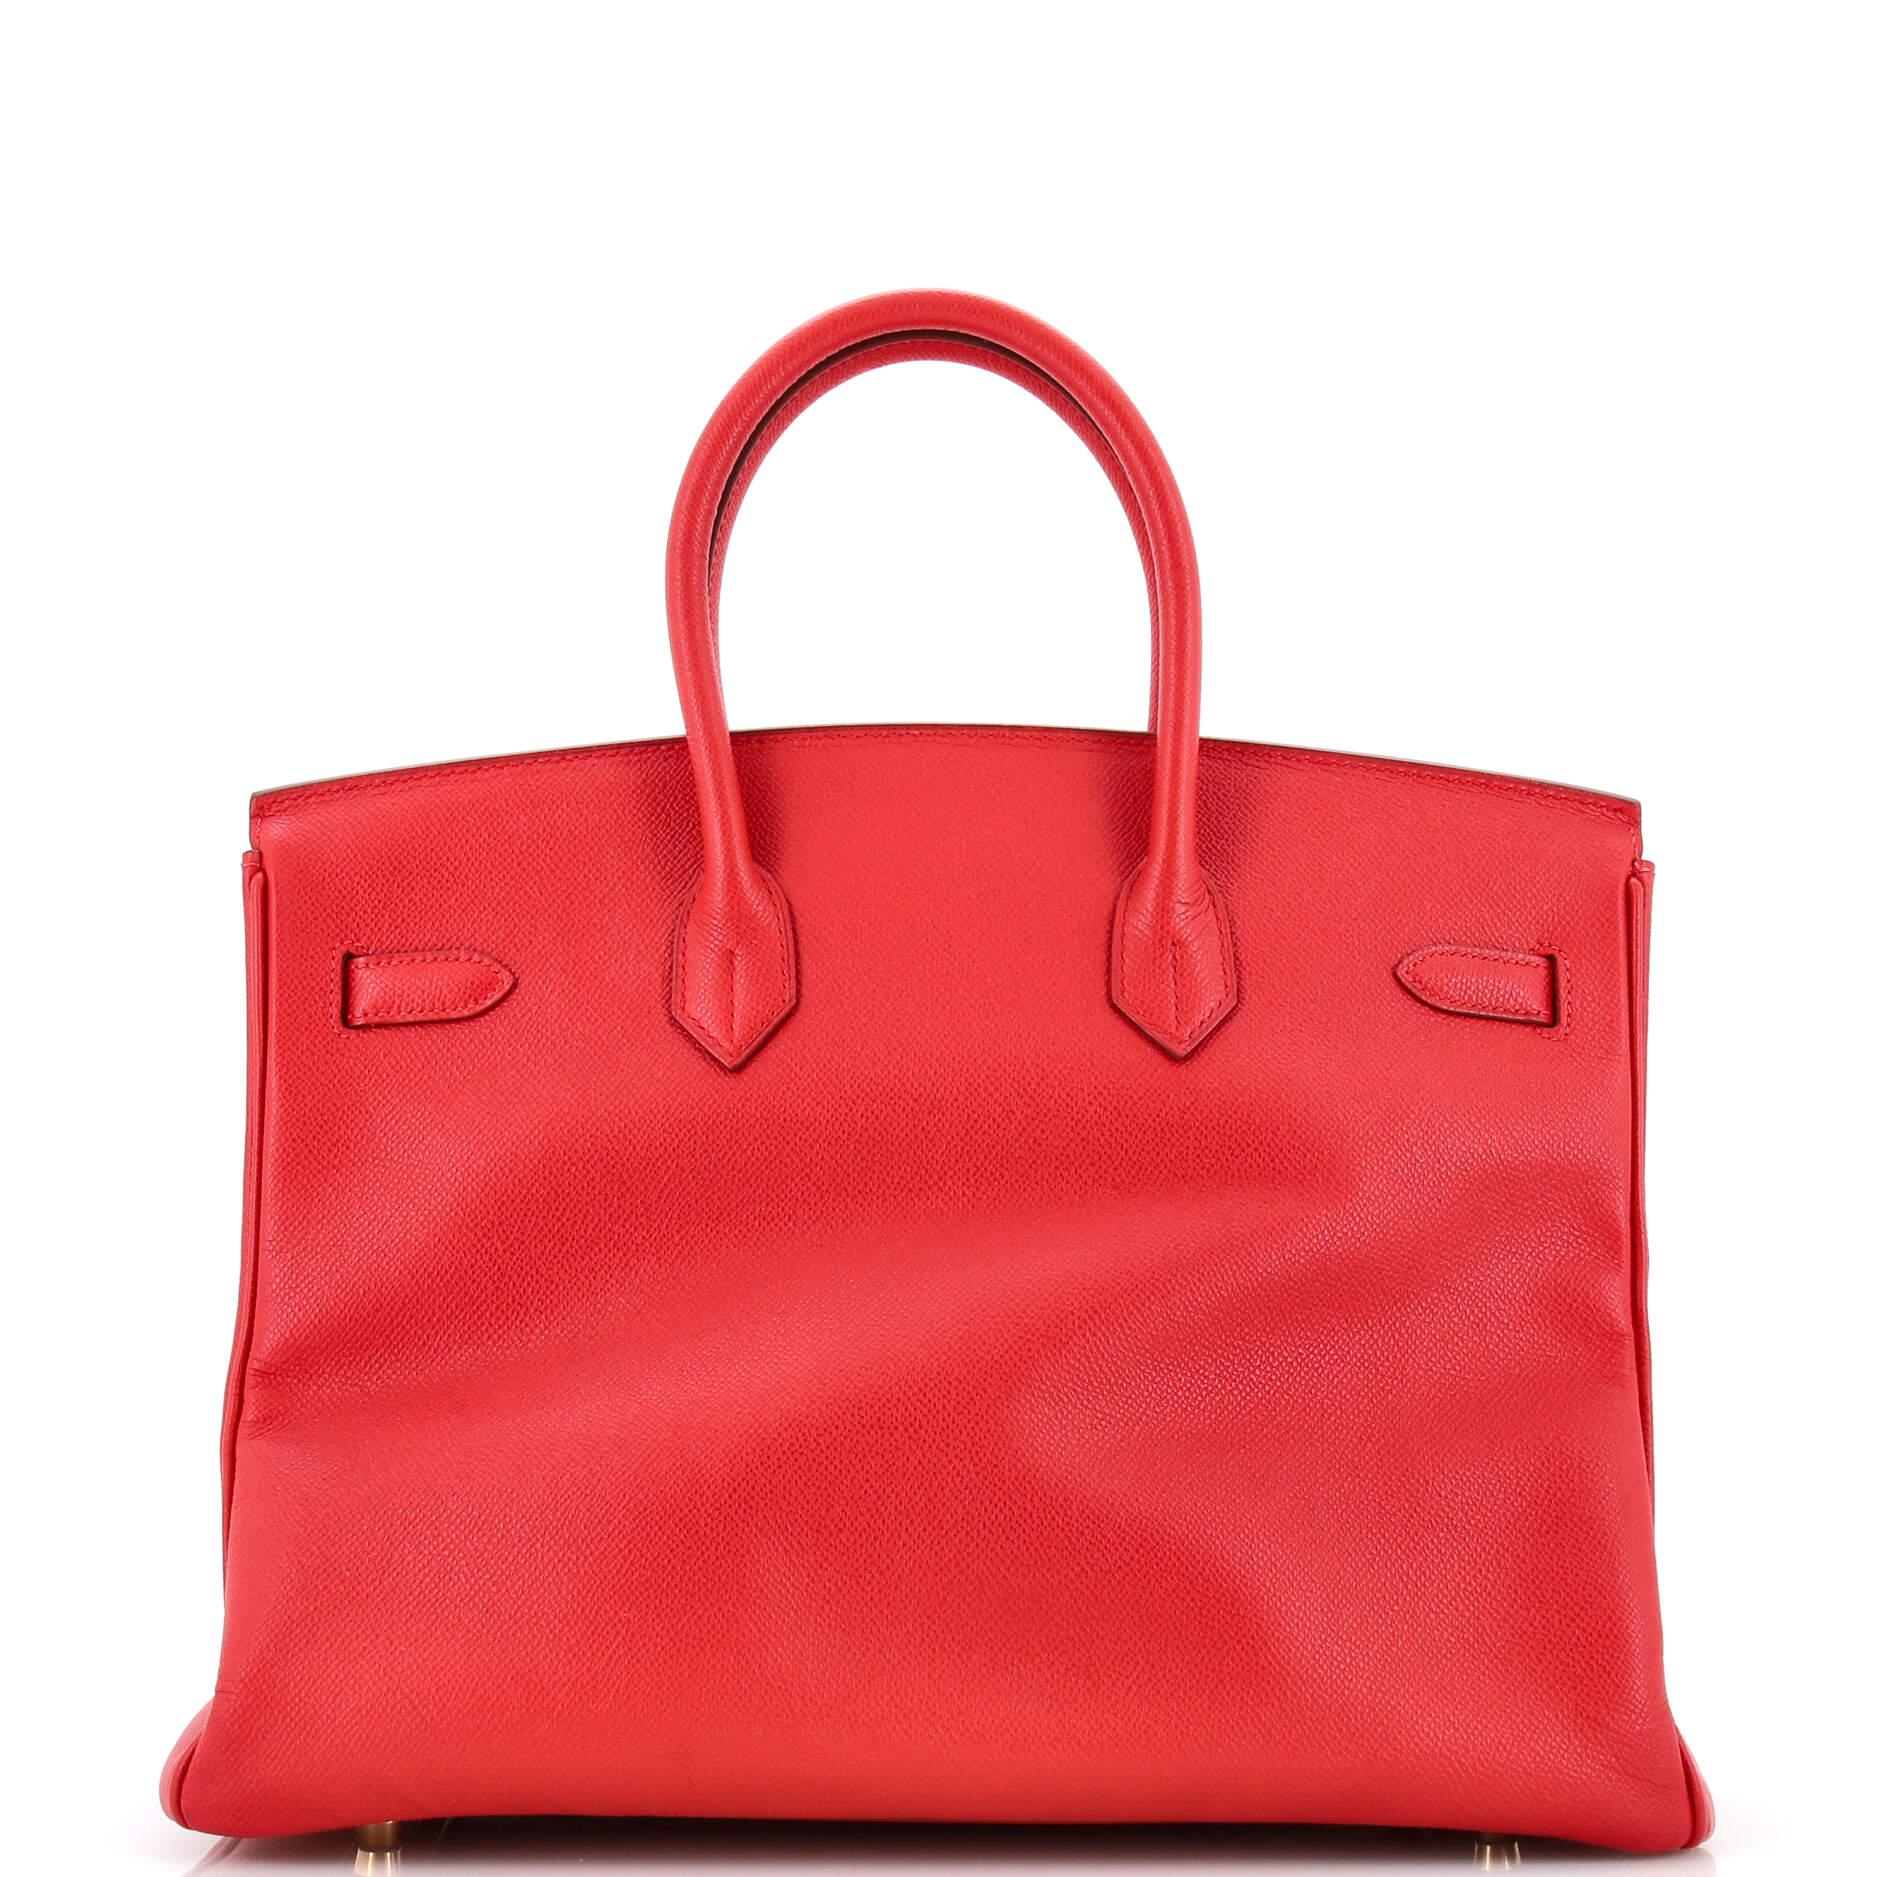 Hermes Birkin Handbag Rouge Vif Veau Grain Lisse with Gold Hardware 35 In Good Condition For Sale In NY, NY